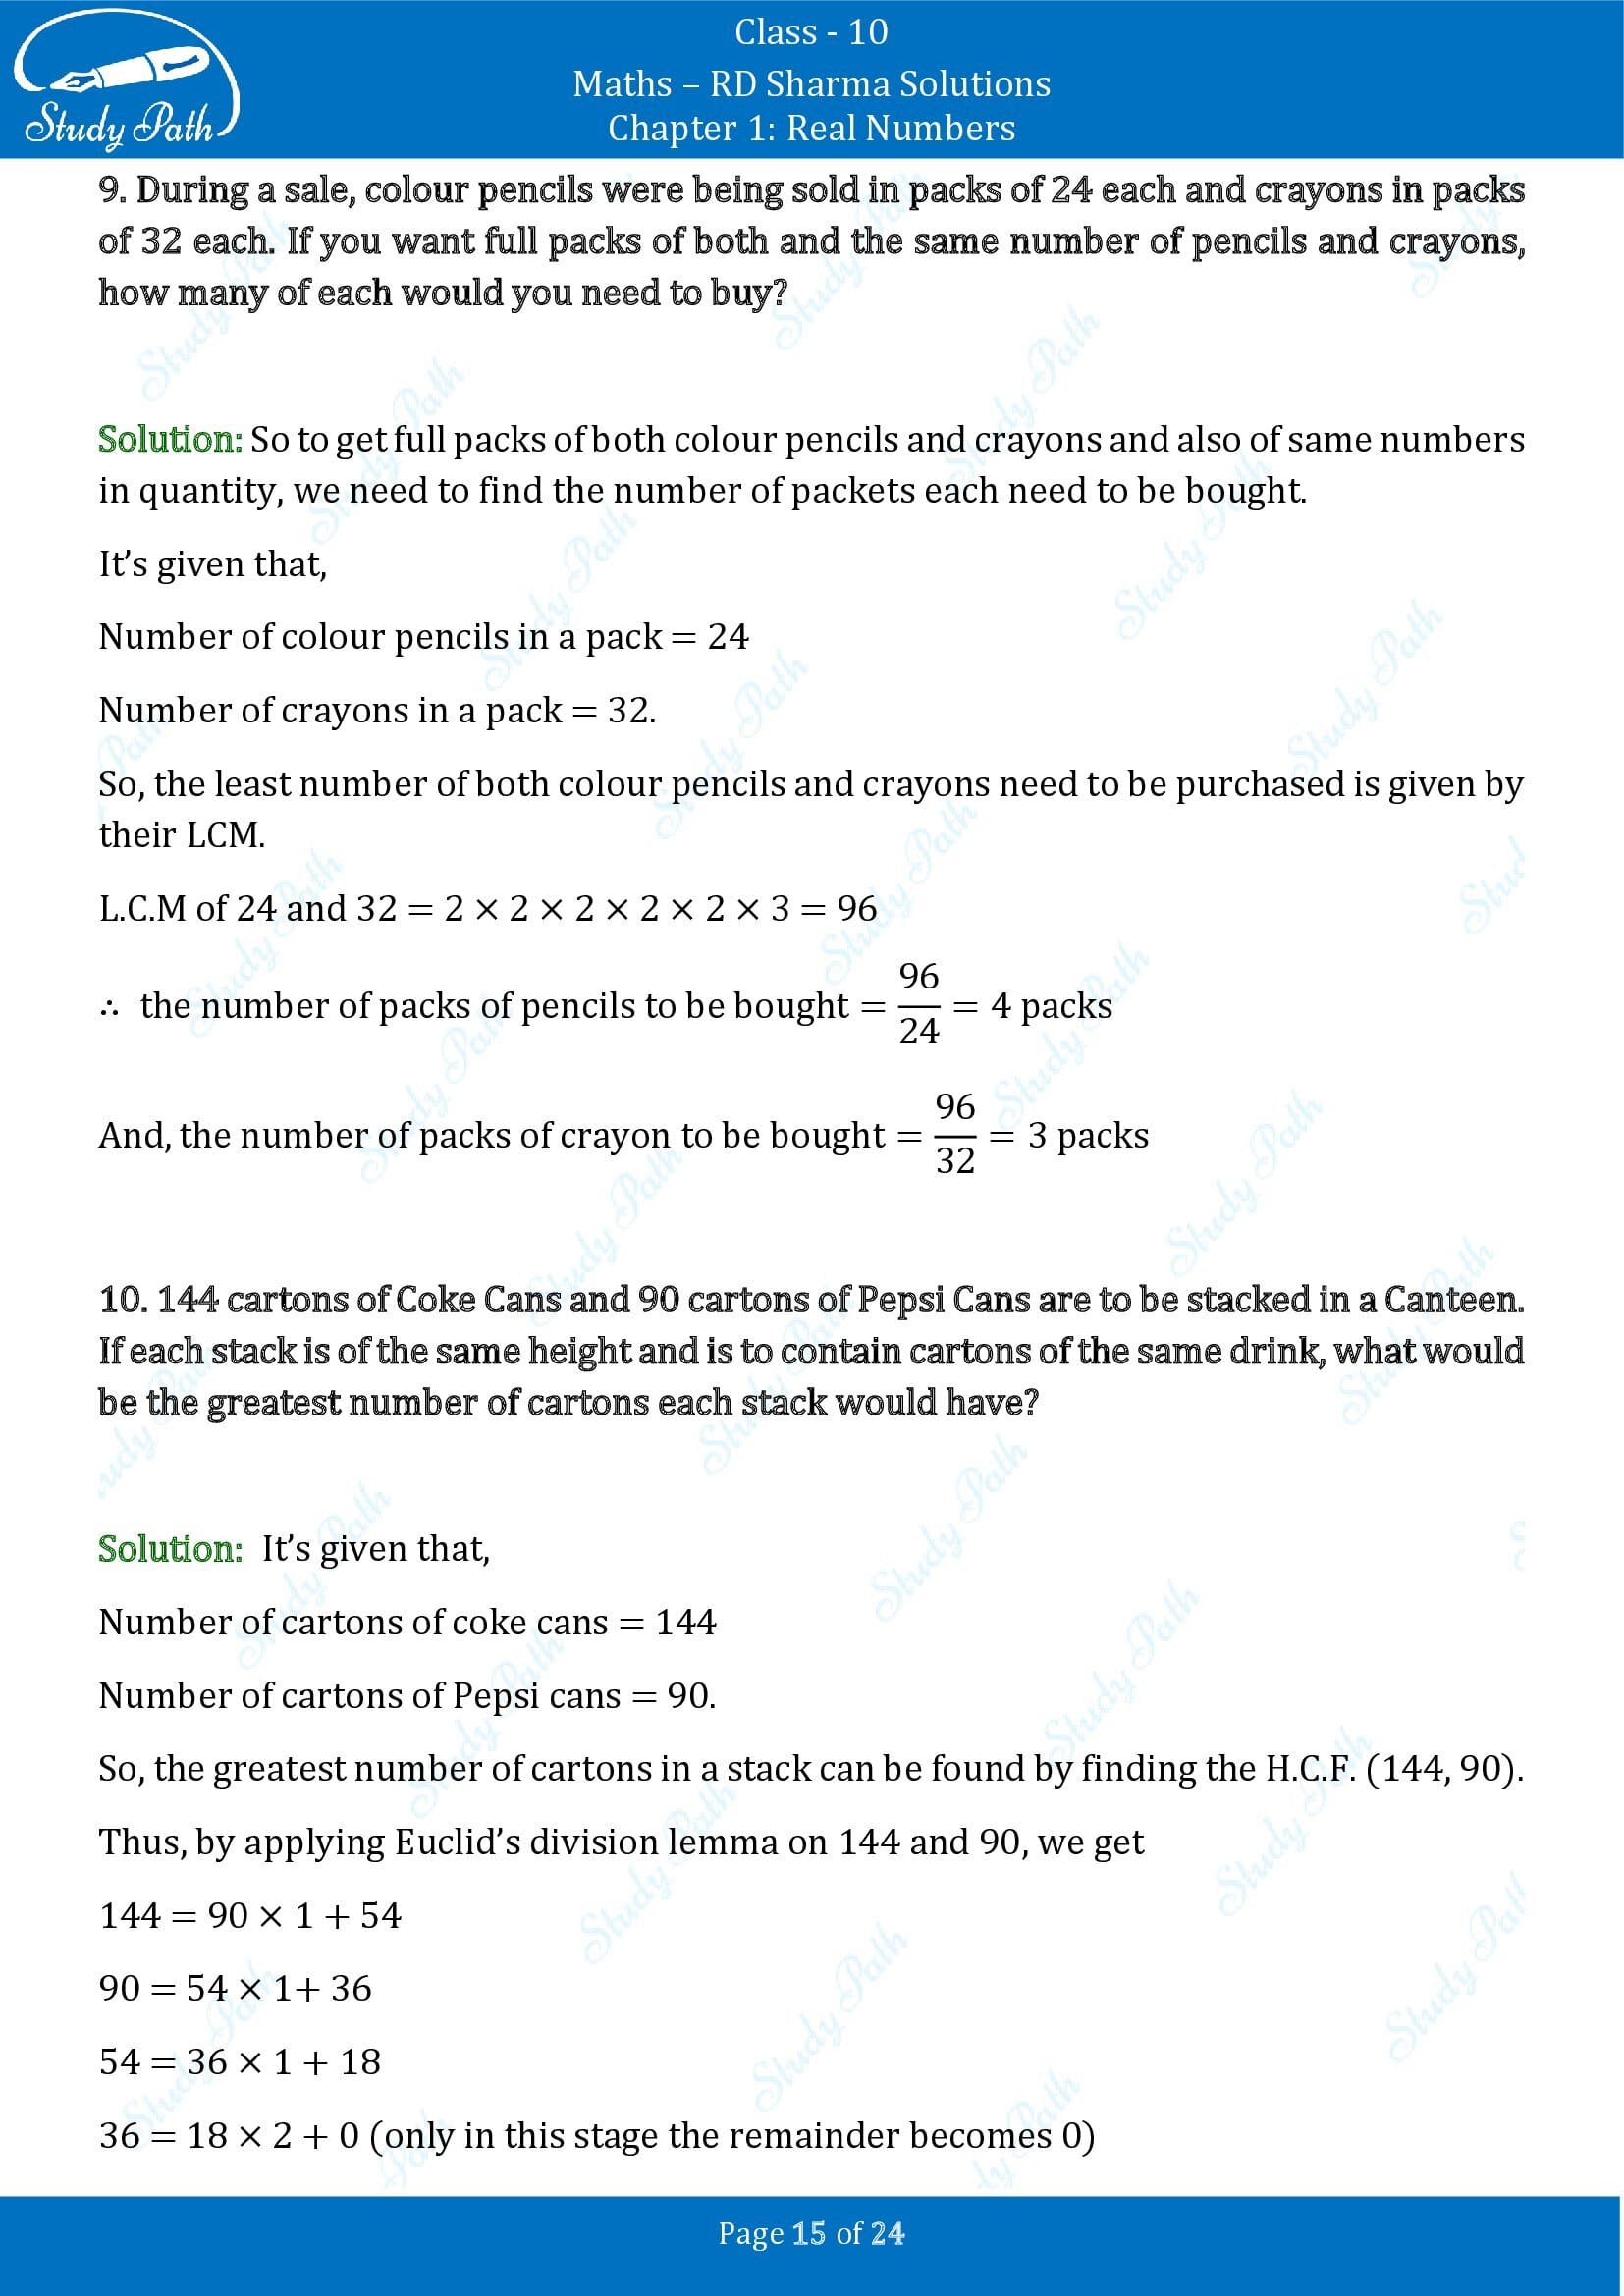 RD Sharma Solutions Class 10 Chapter 1 Real Numbers Exercise 1.2 00015